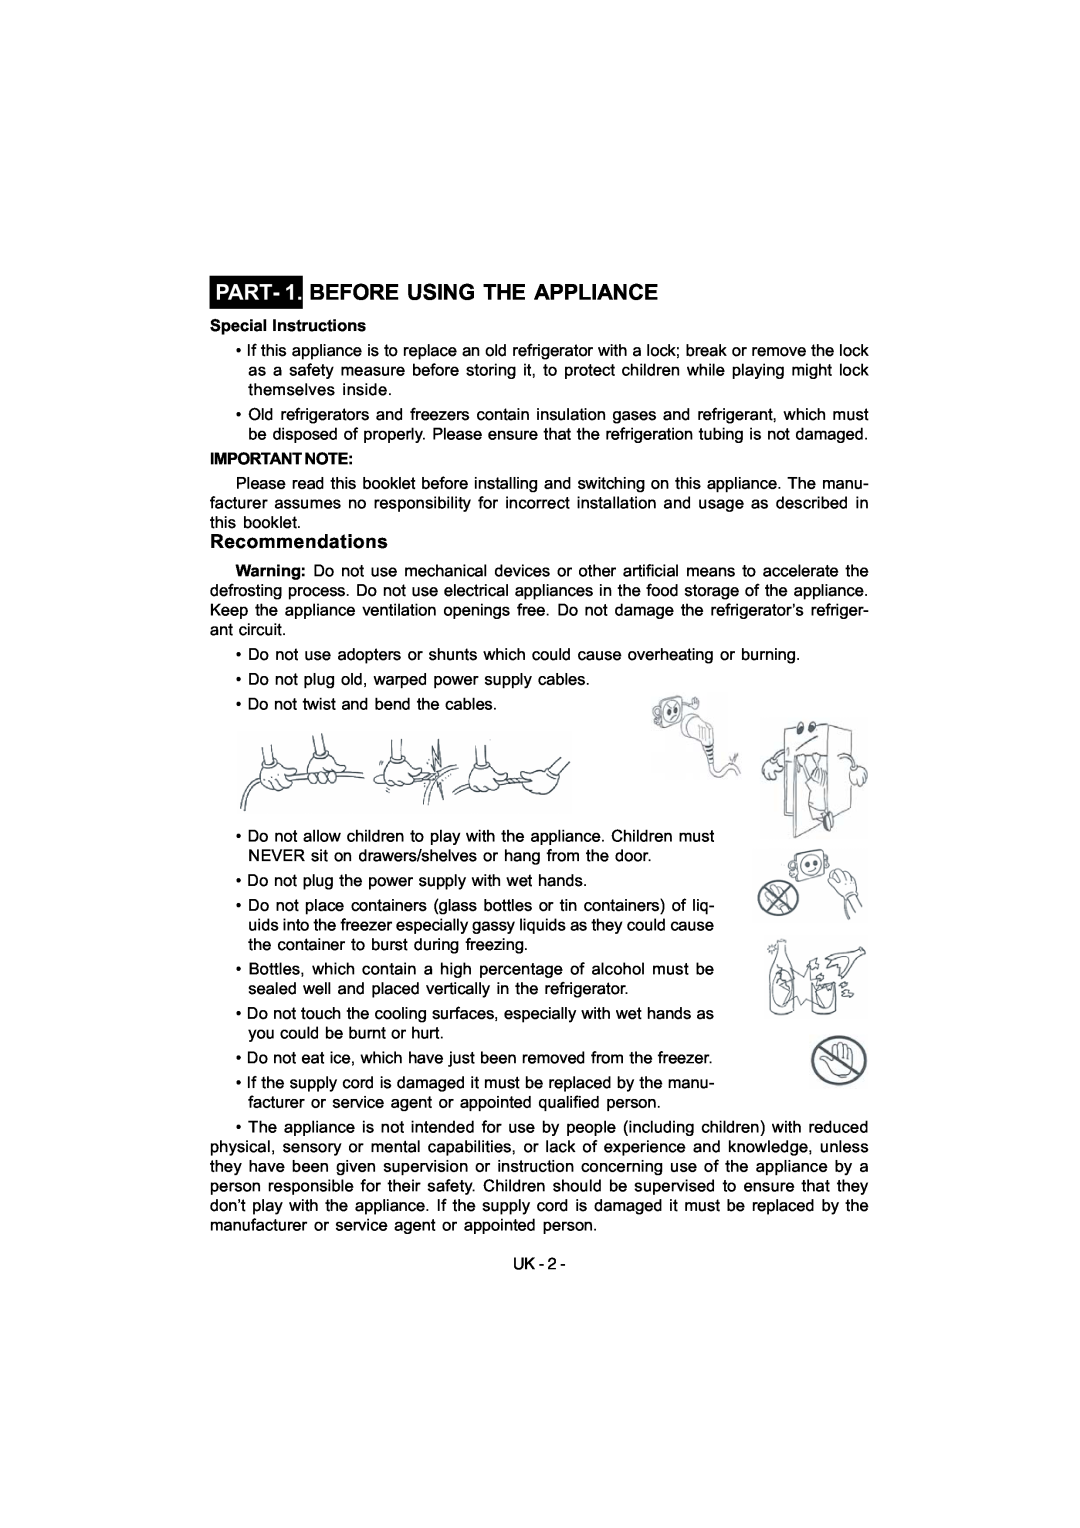 Smeg FD54APXNF manual PART- 1. BEFORE USING THE APPLIANCE, Recommendations 